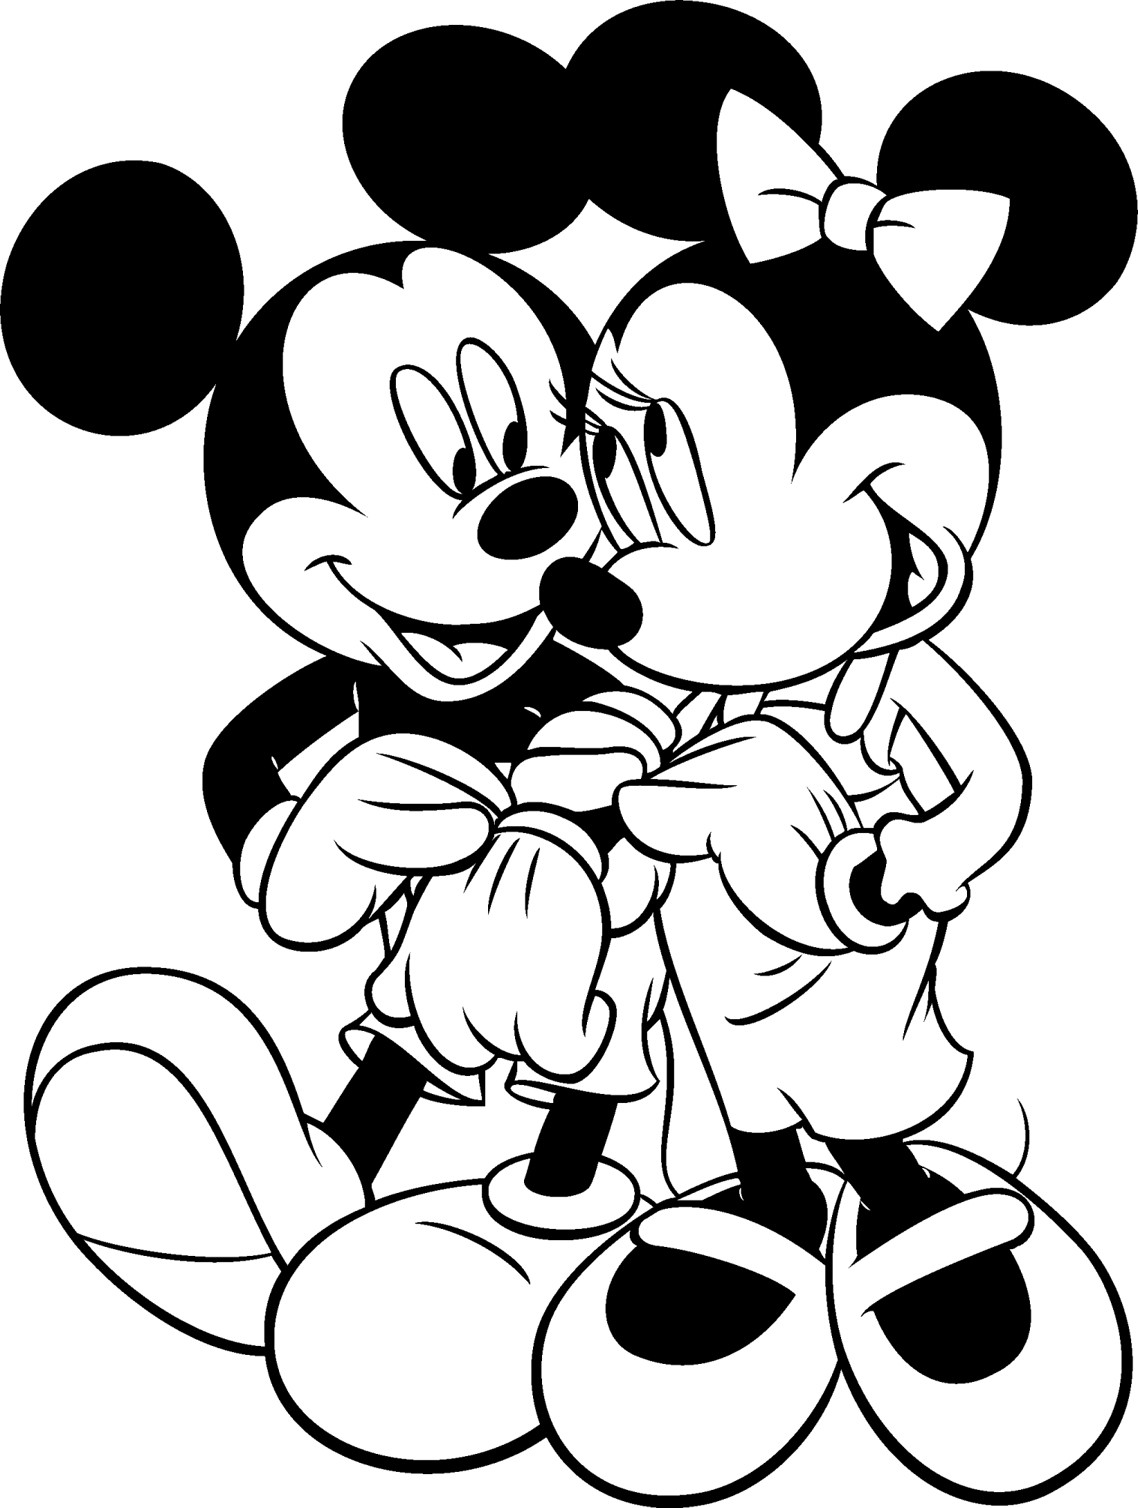 Free Printable Coloring Pages Disney
 DISNEY COLORING PAGES